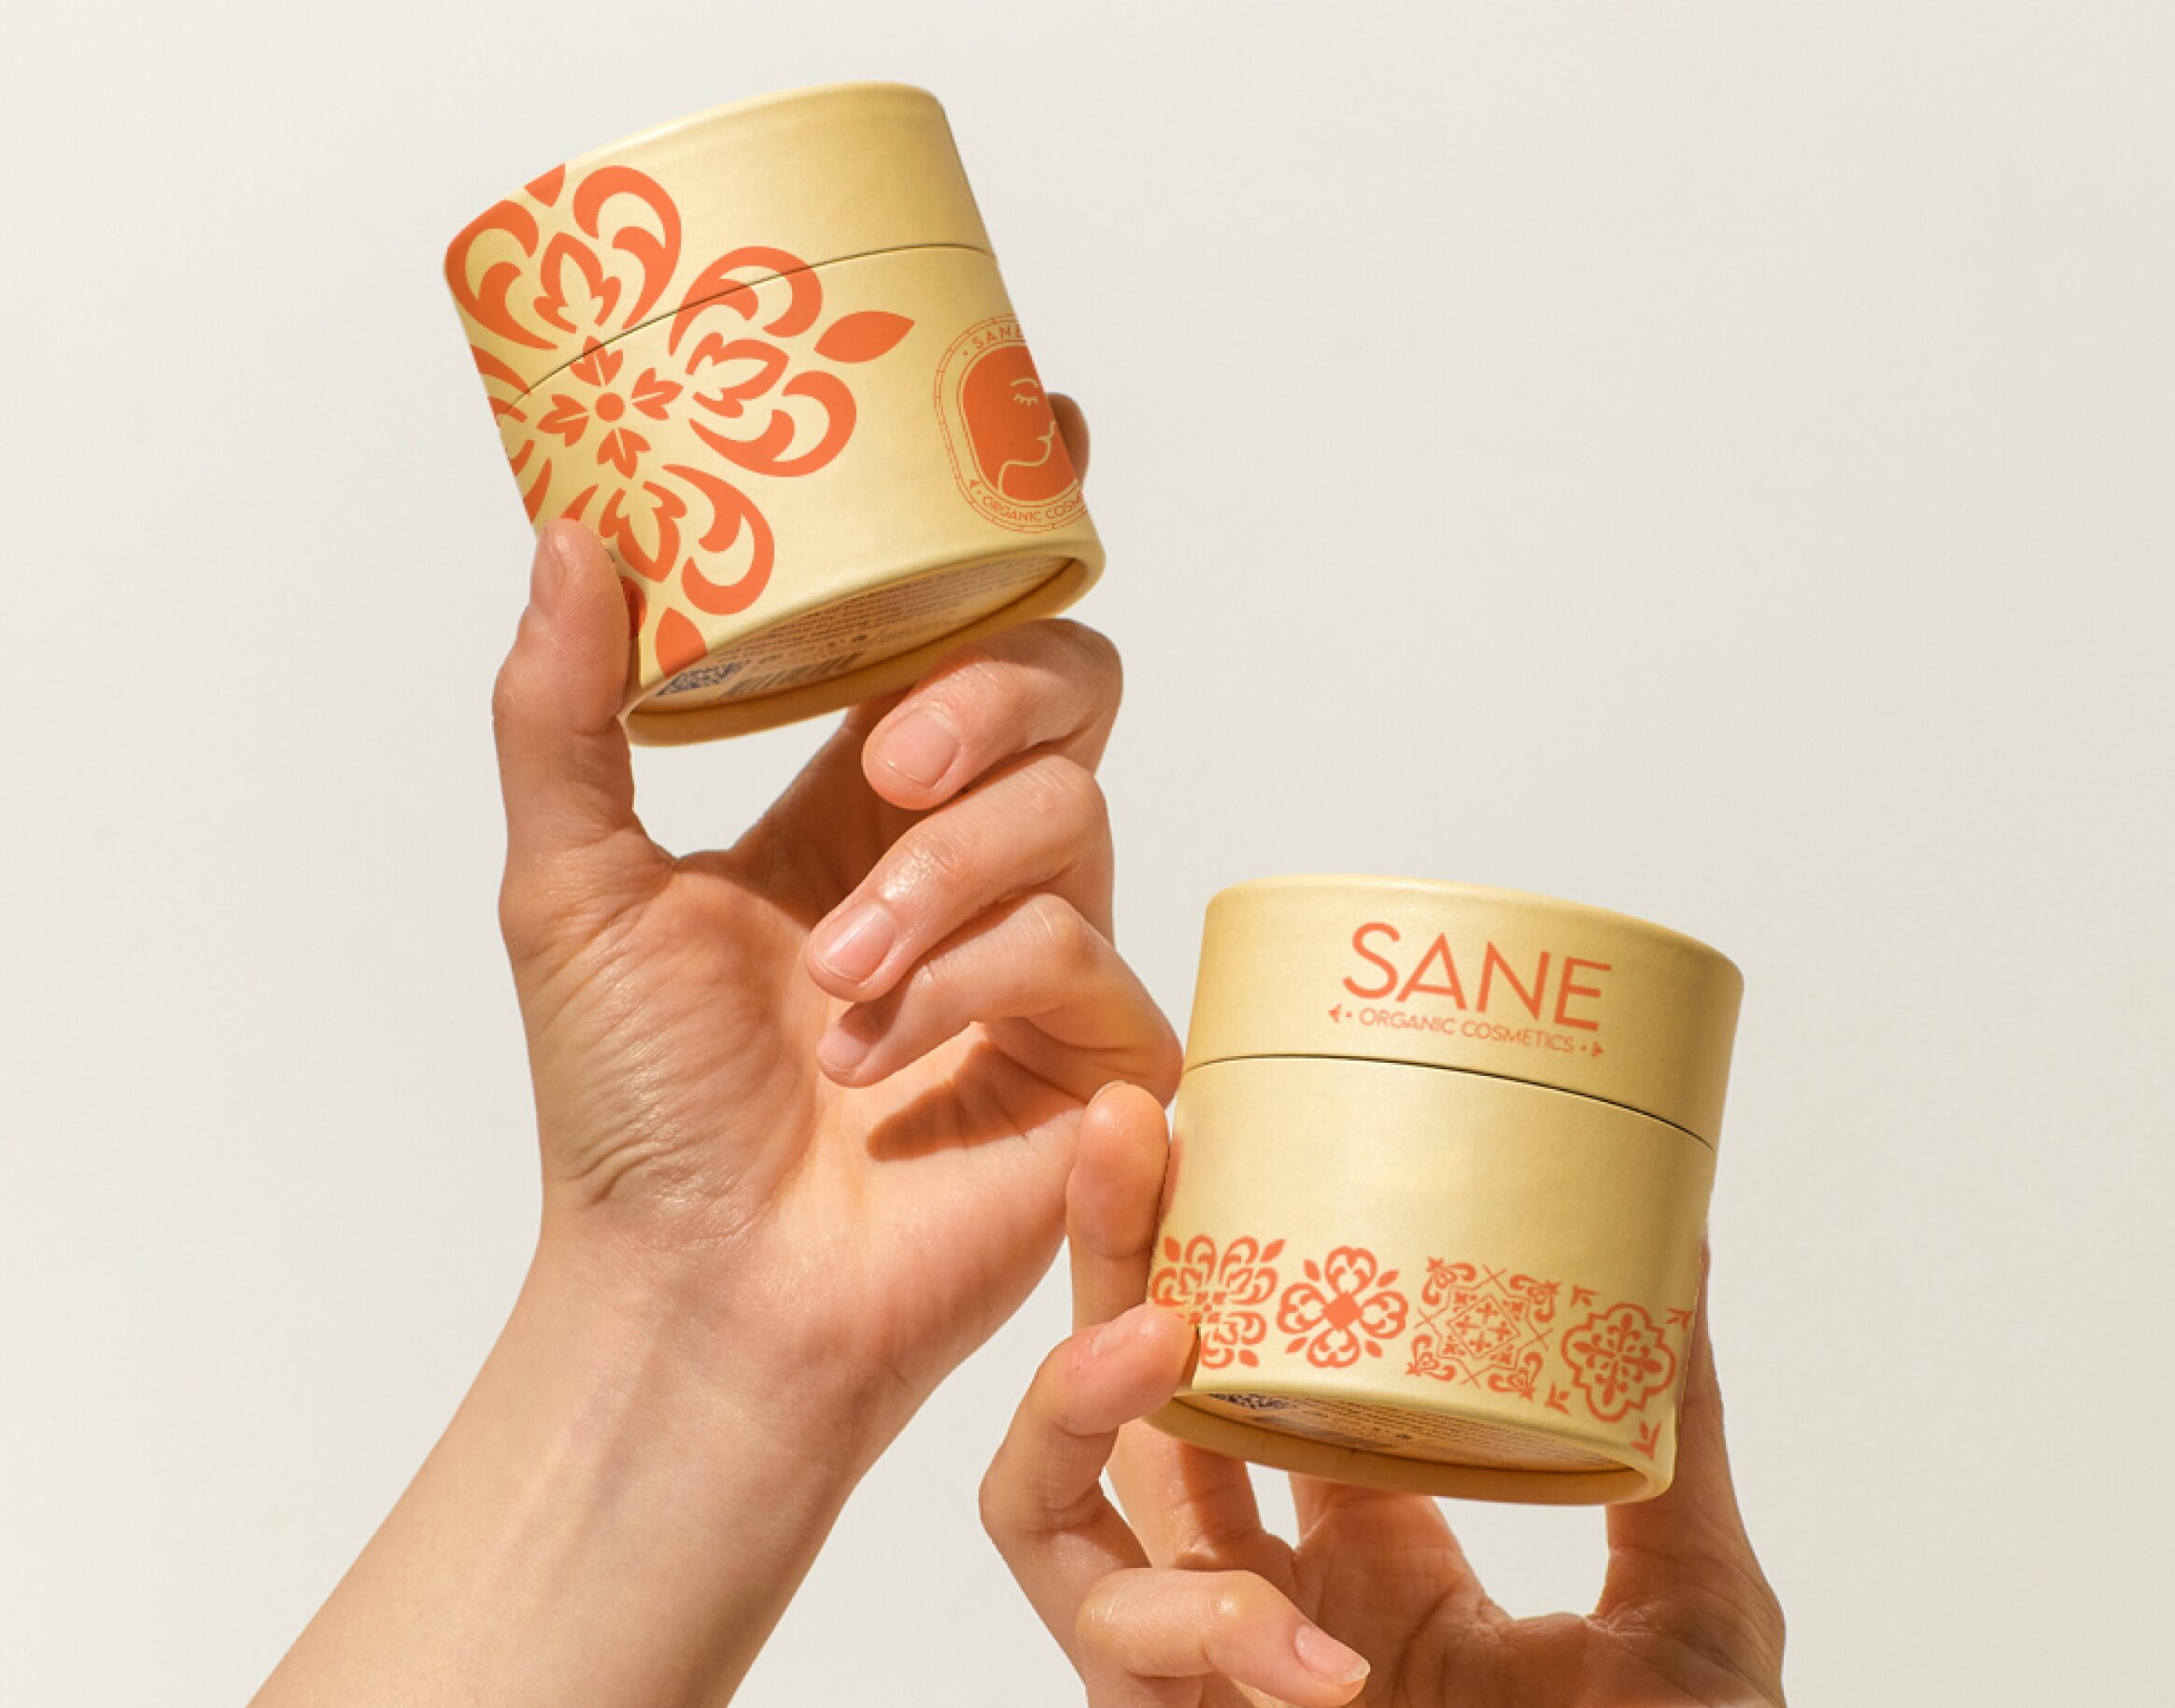 hands holding two organic cosmetic pots of cream. Made of cardboard in pastel colors, orange and yellow.